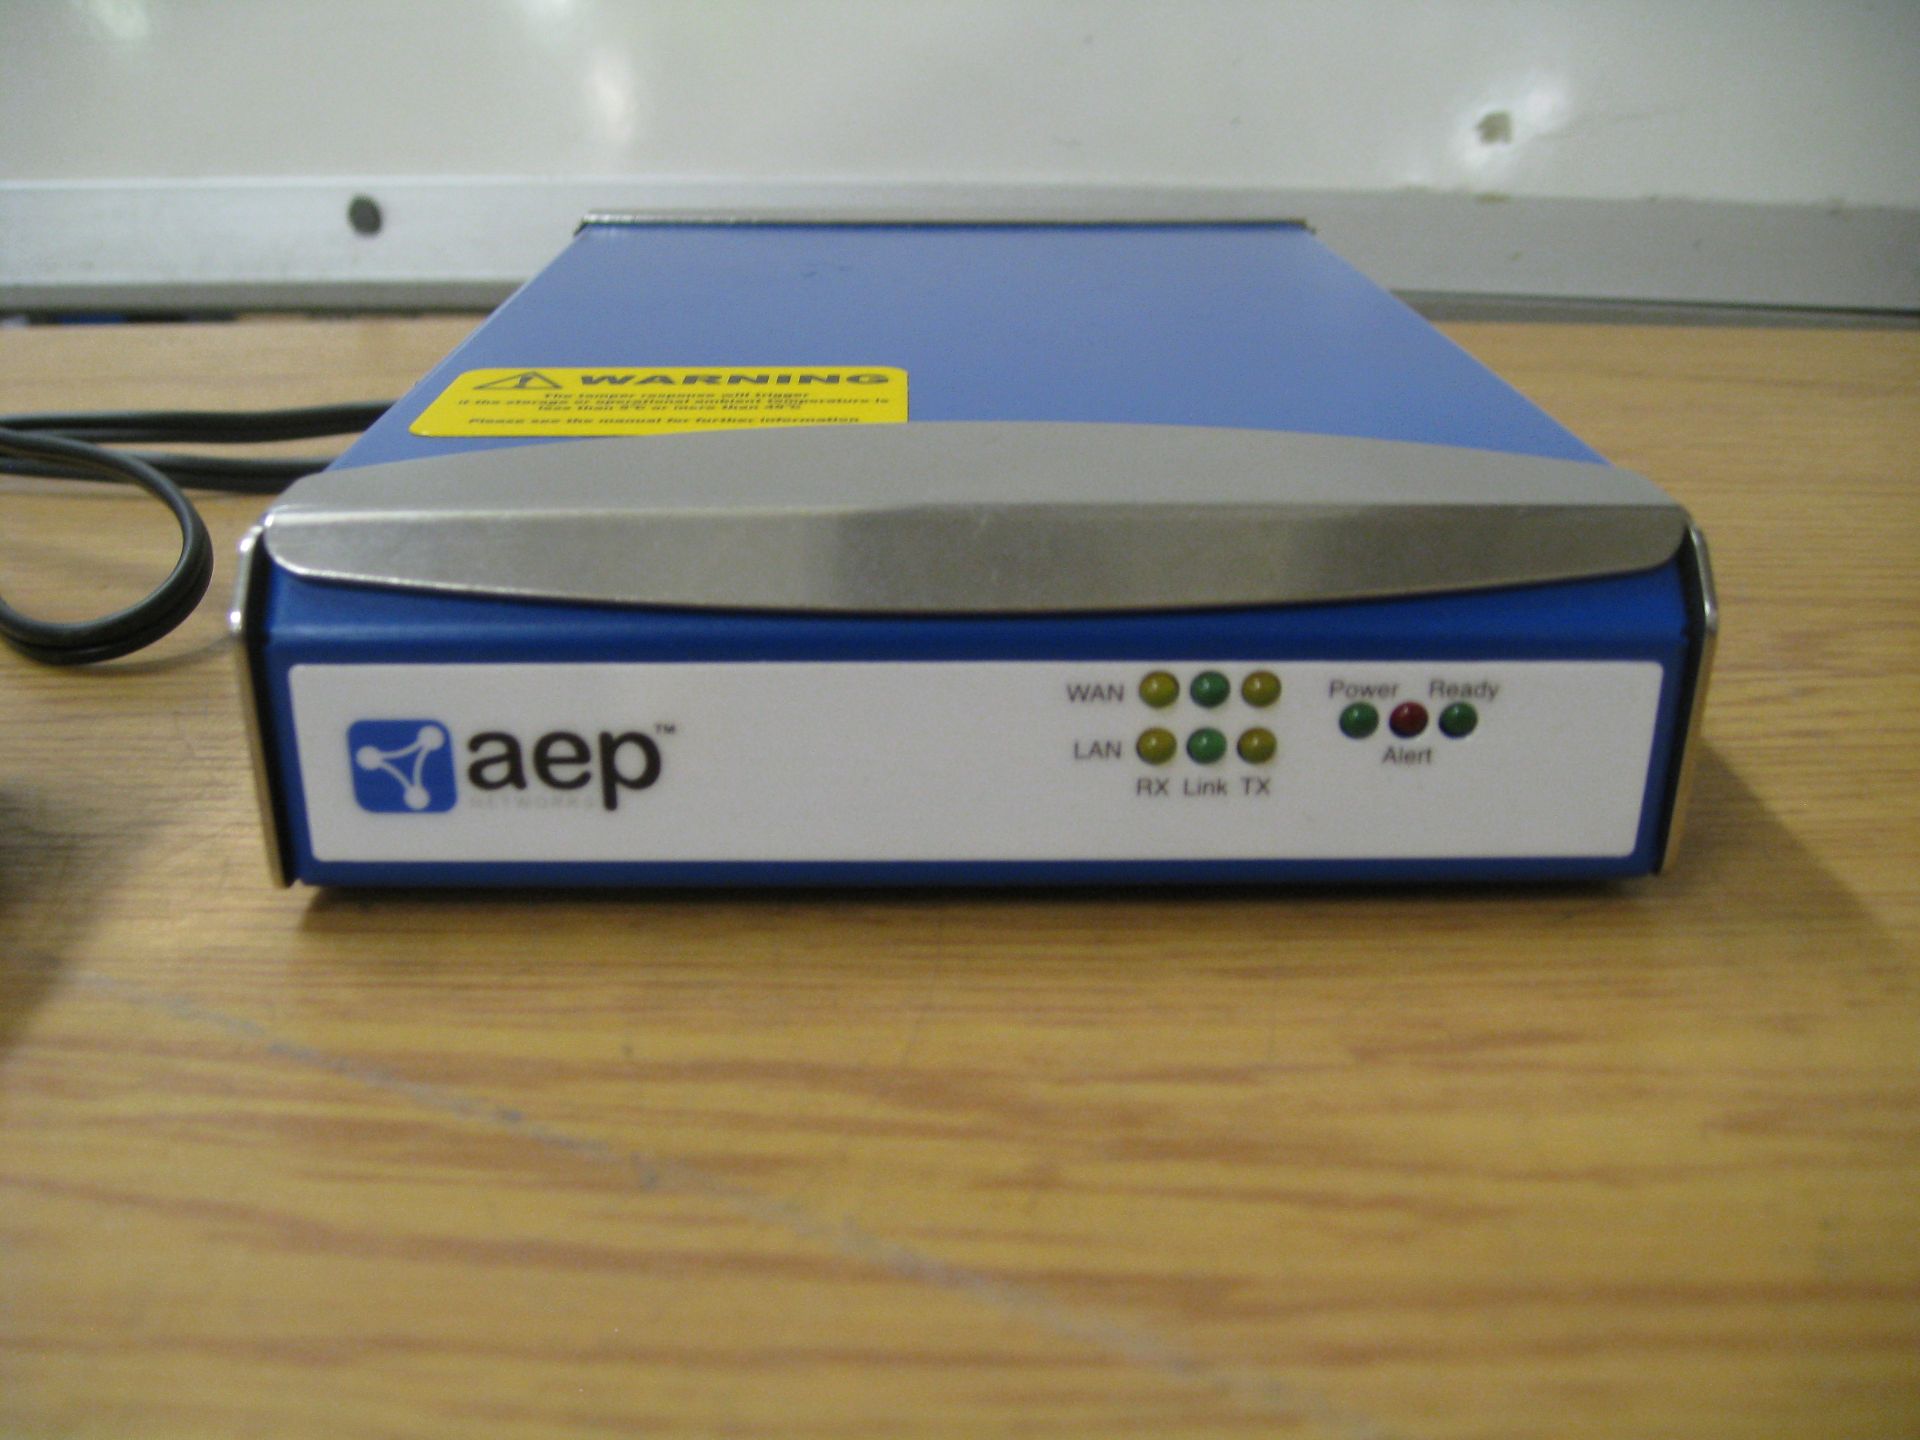 AEP Net Remote encryptor hardware VPN (virtual private network) client with psu. More info at: www. - Image 2 of 4